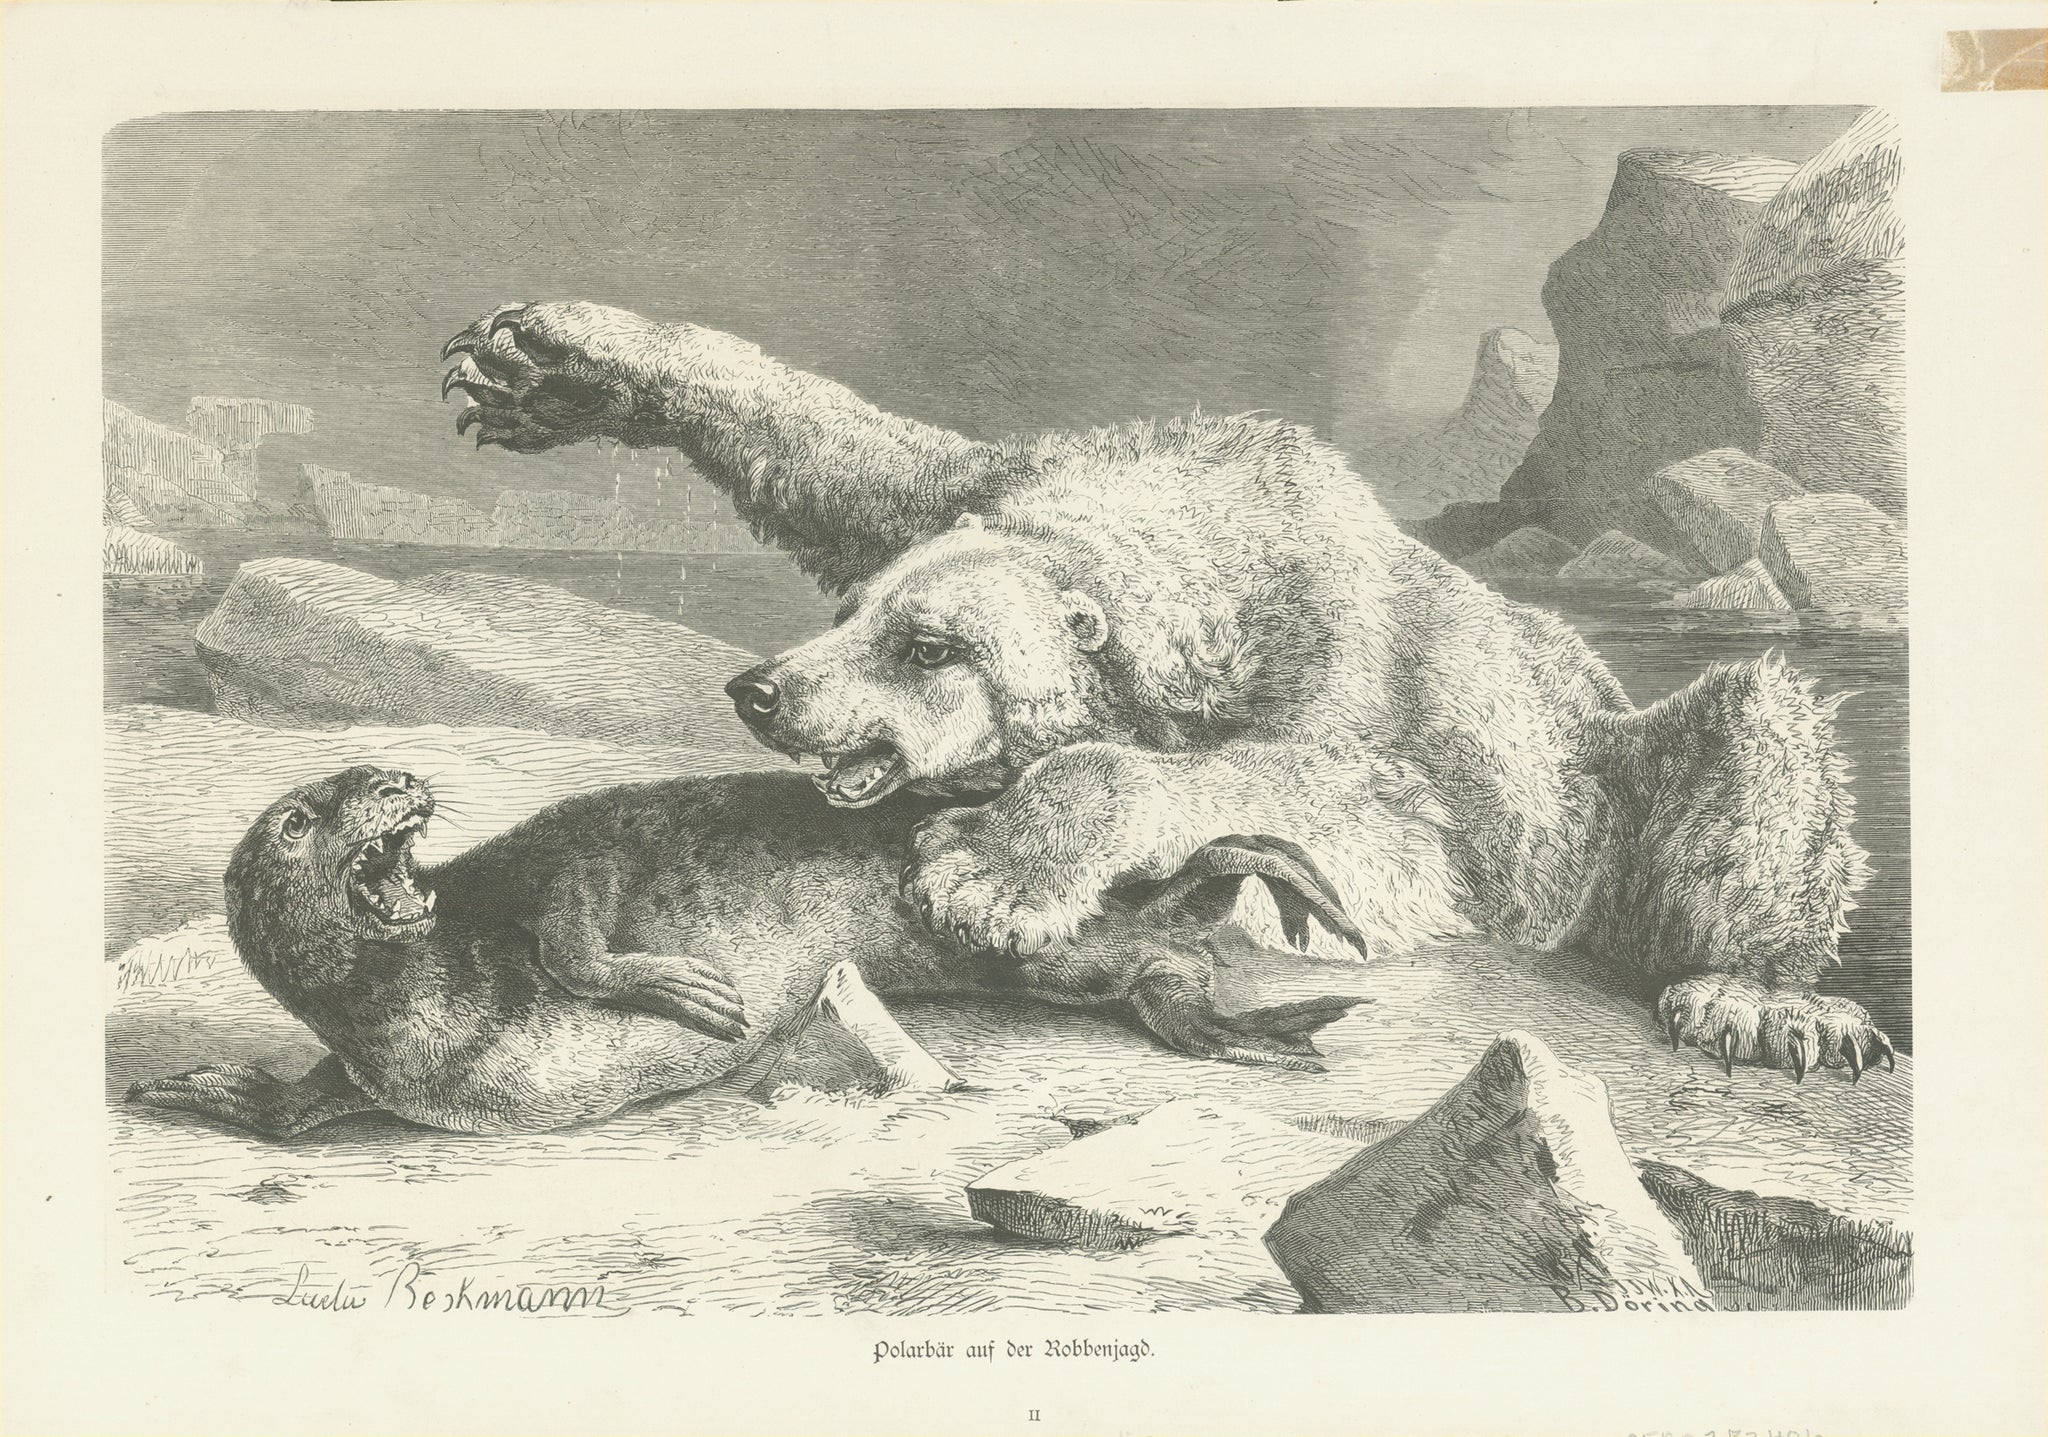 "Polarbaer auf Robbenjagd"  Original antique print   Wood engraving by Ludwig Beckmann published 1880. On the reverse side is an image showing the most common predators.